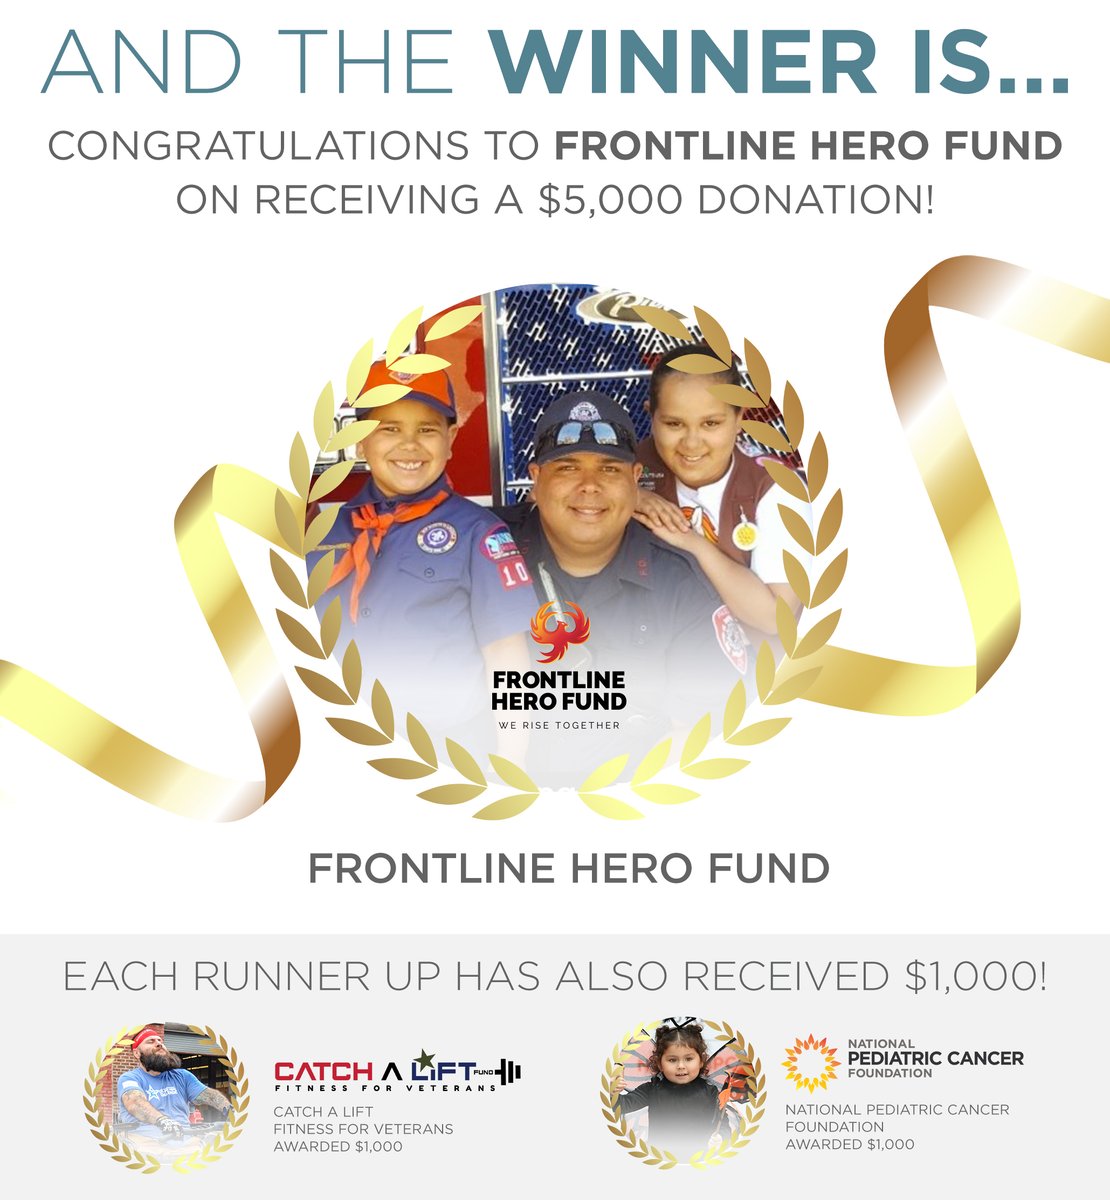 The people have spoken! 🥳 #FrontlineHeroFund is the #winner of this year’s #charitygiveaway2020, receiving a $5,000 donation 💵 Thank you to @PediatricCancer & @CatchALiftFund for participating—each will receive $1,000 as well! We received a total of 9️⃣6️⃣0️⃣9️⃣ votes—INCREDIBLE!